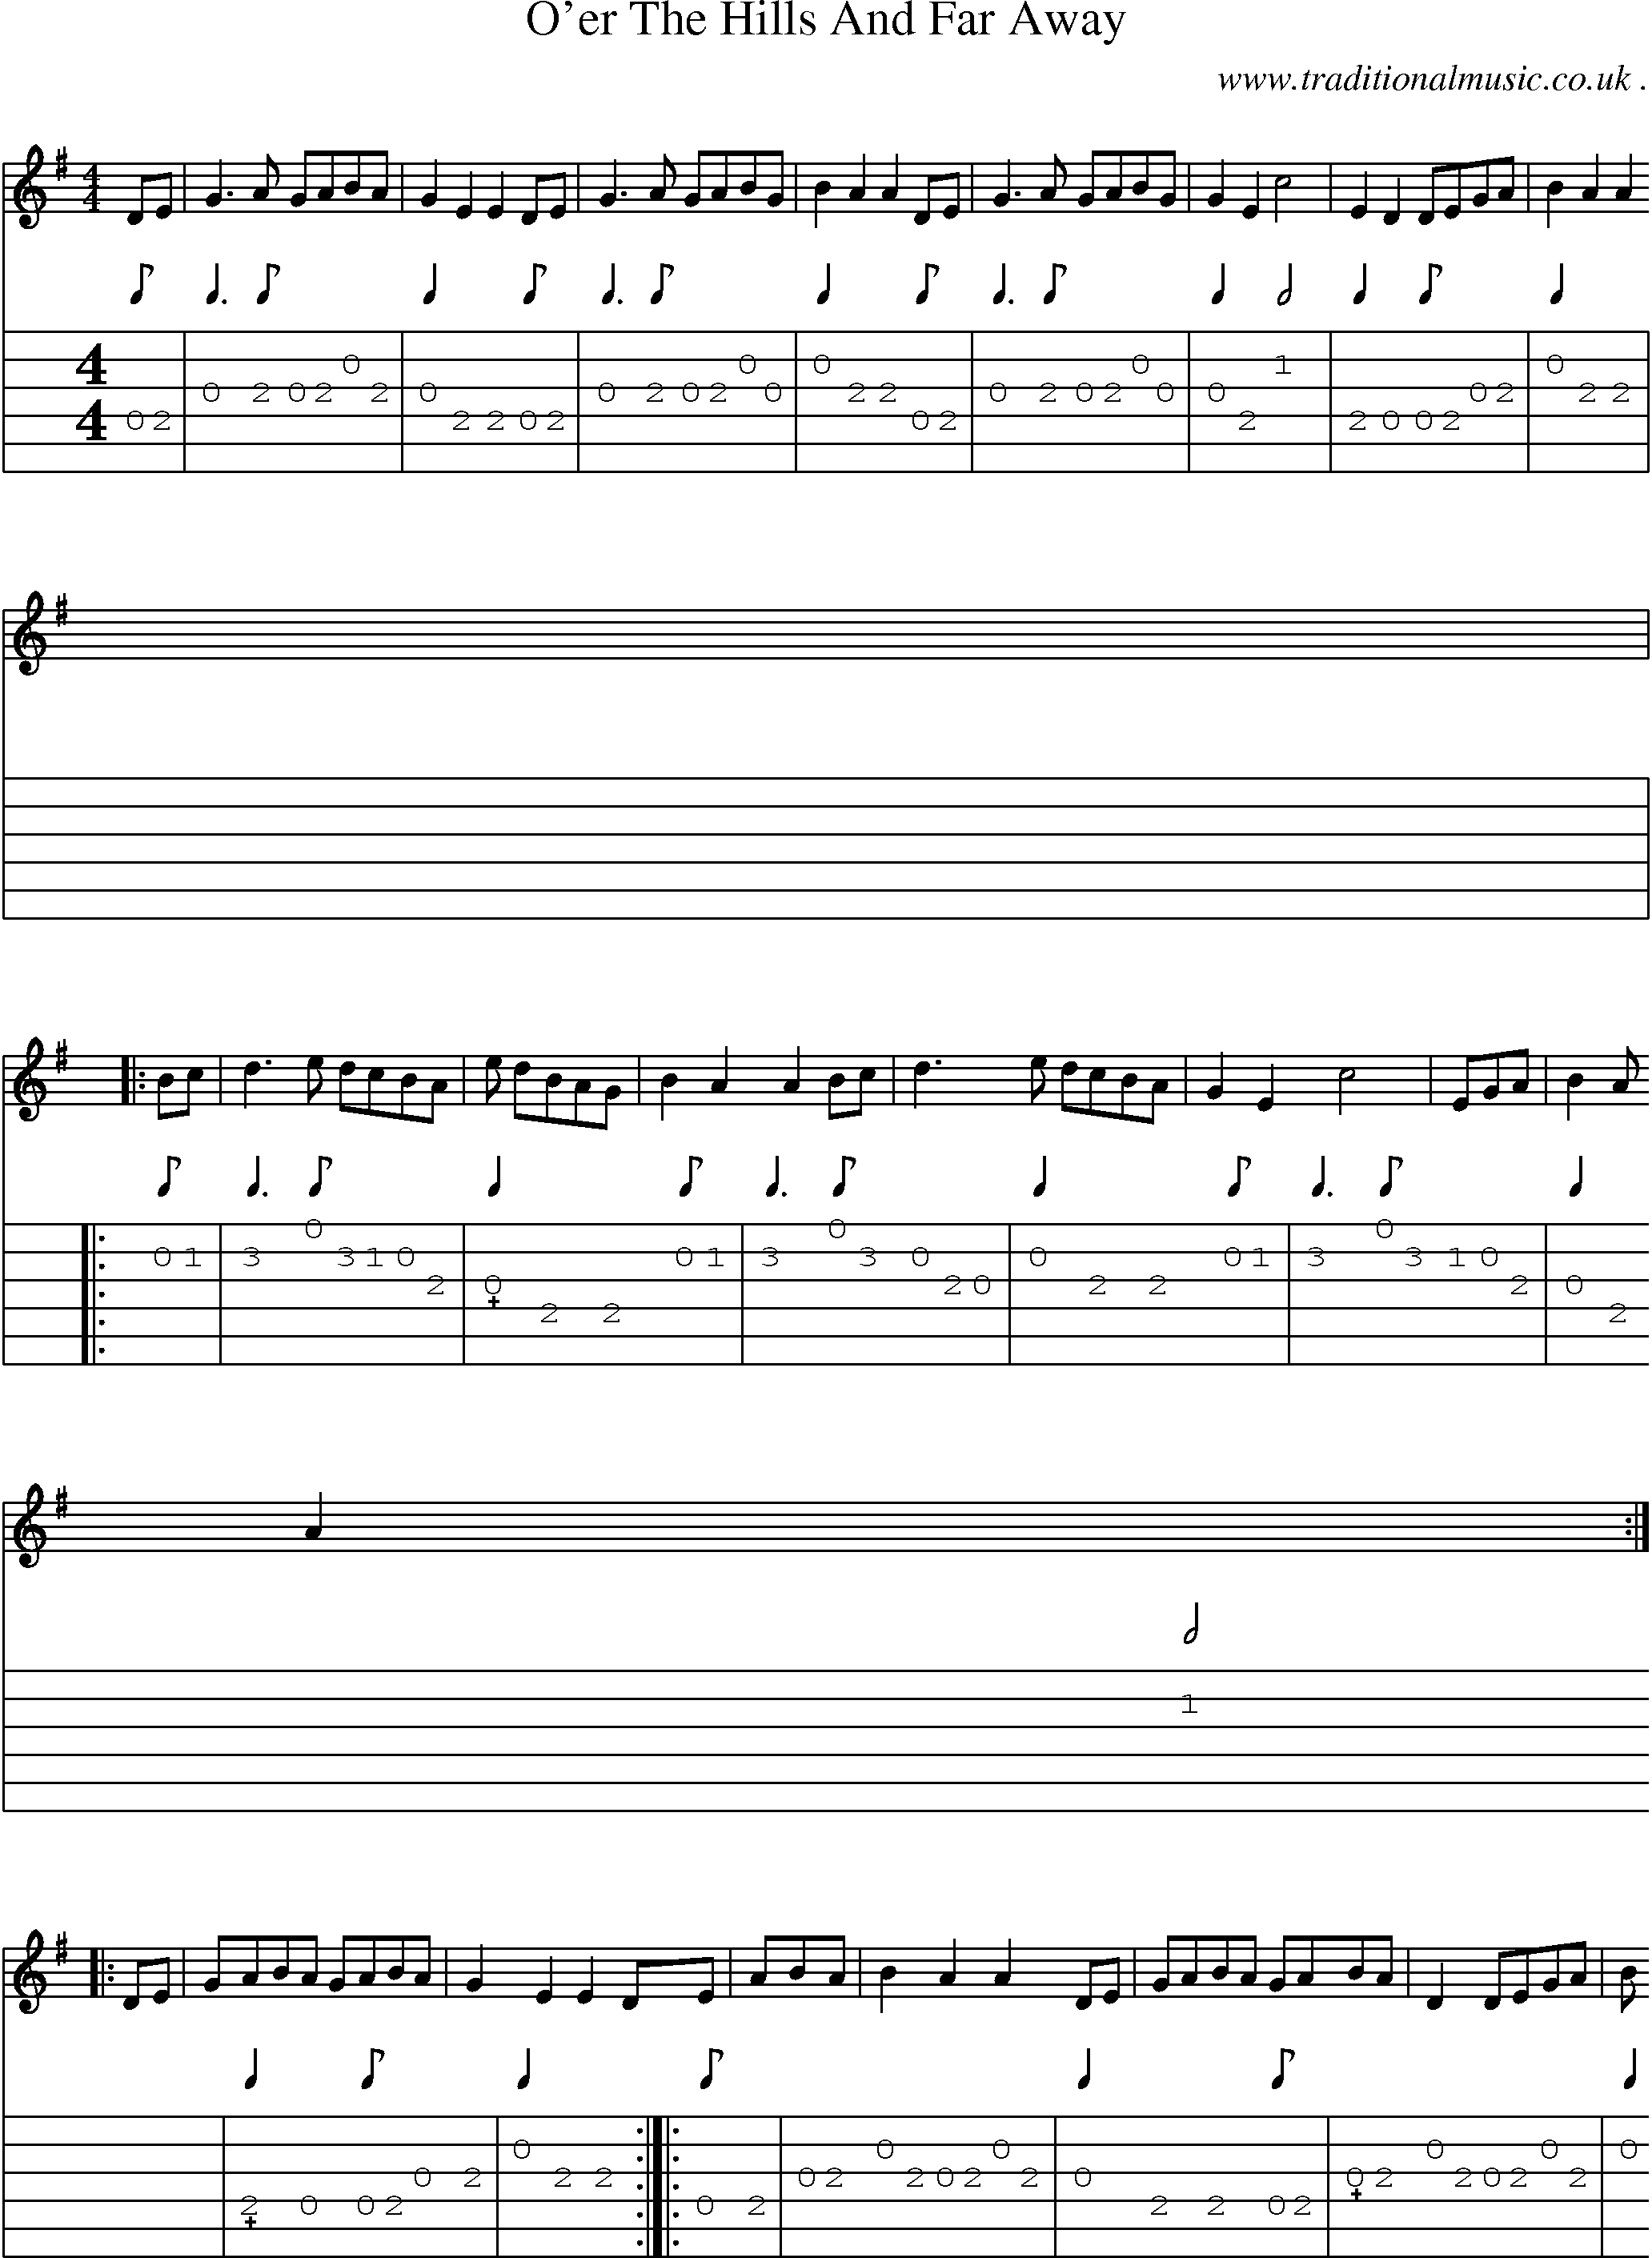 Sheet-Music and Guitar Tabs for Oer The Hills And Far Away